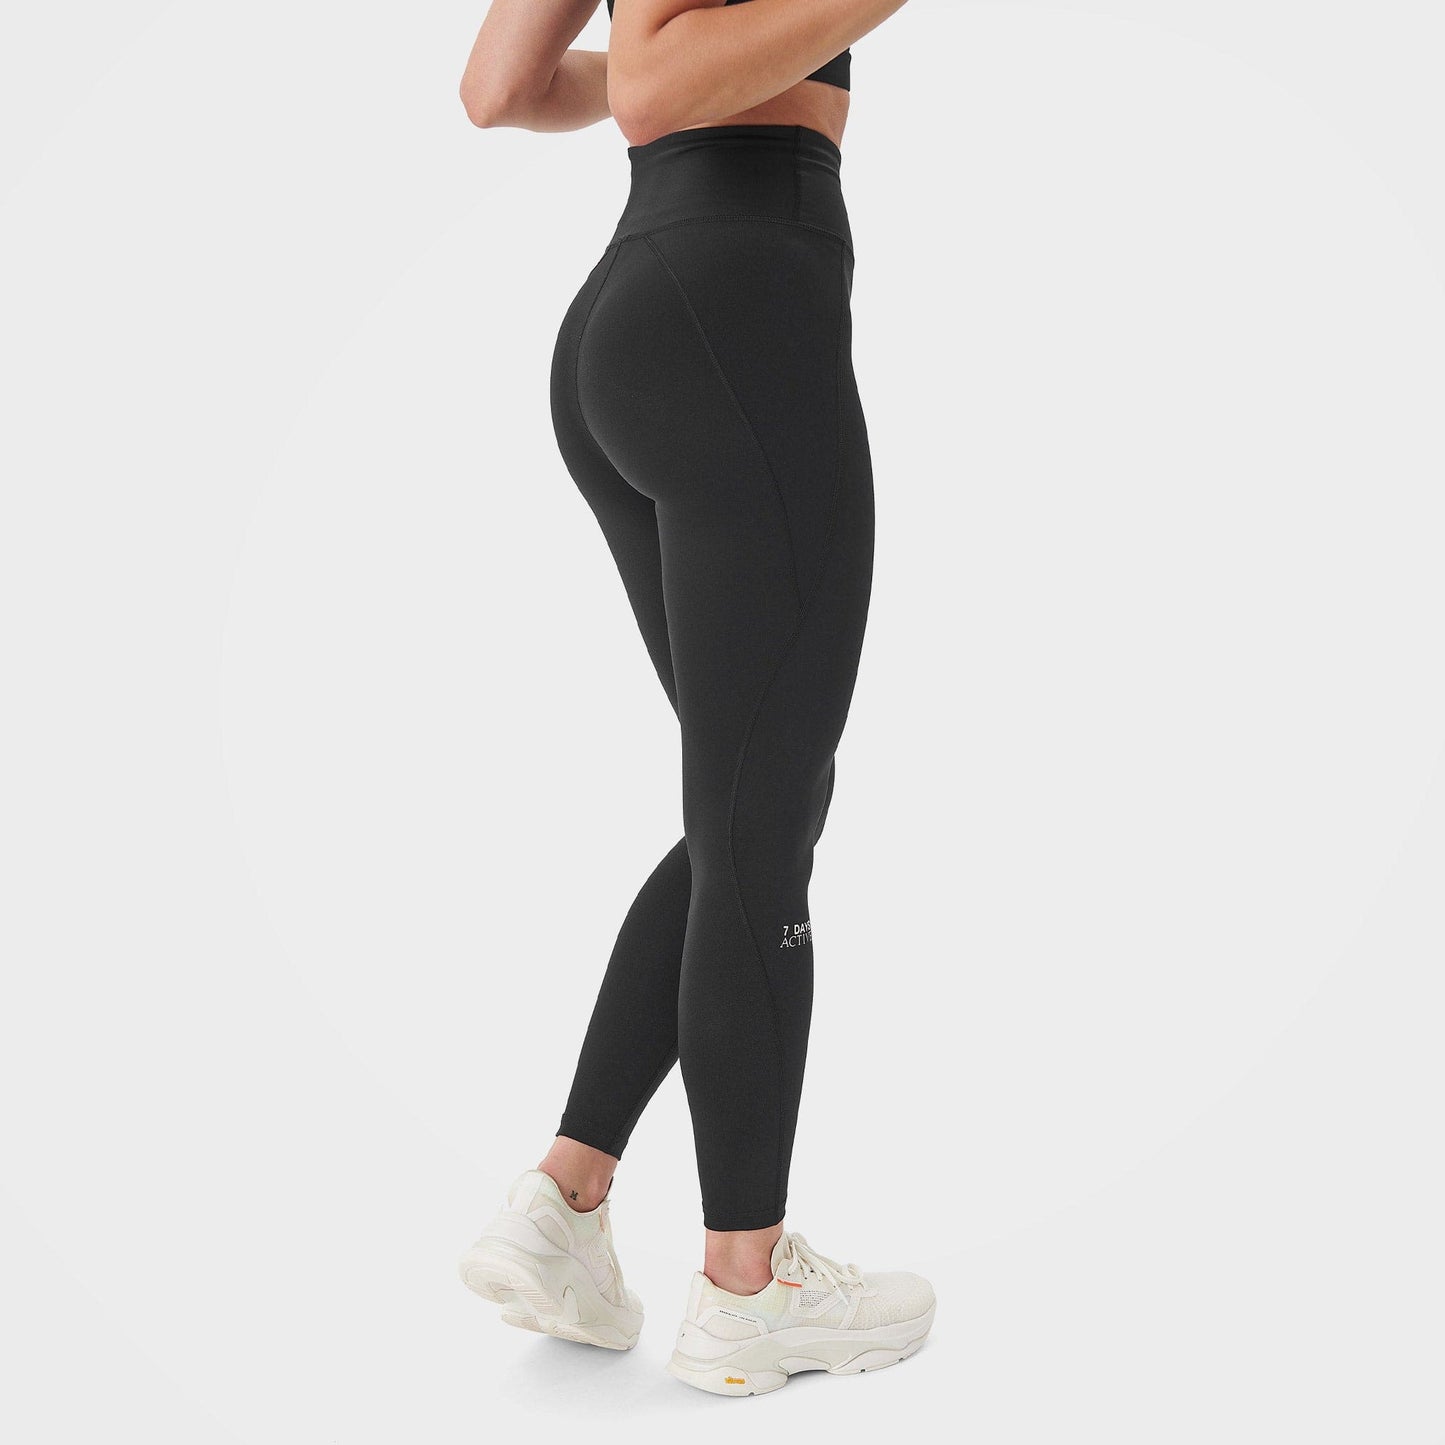 Black Women's Tights, Leggings by 7Days Active